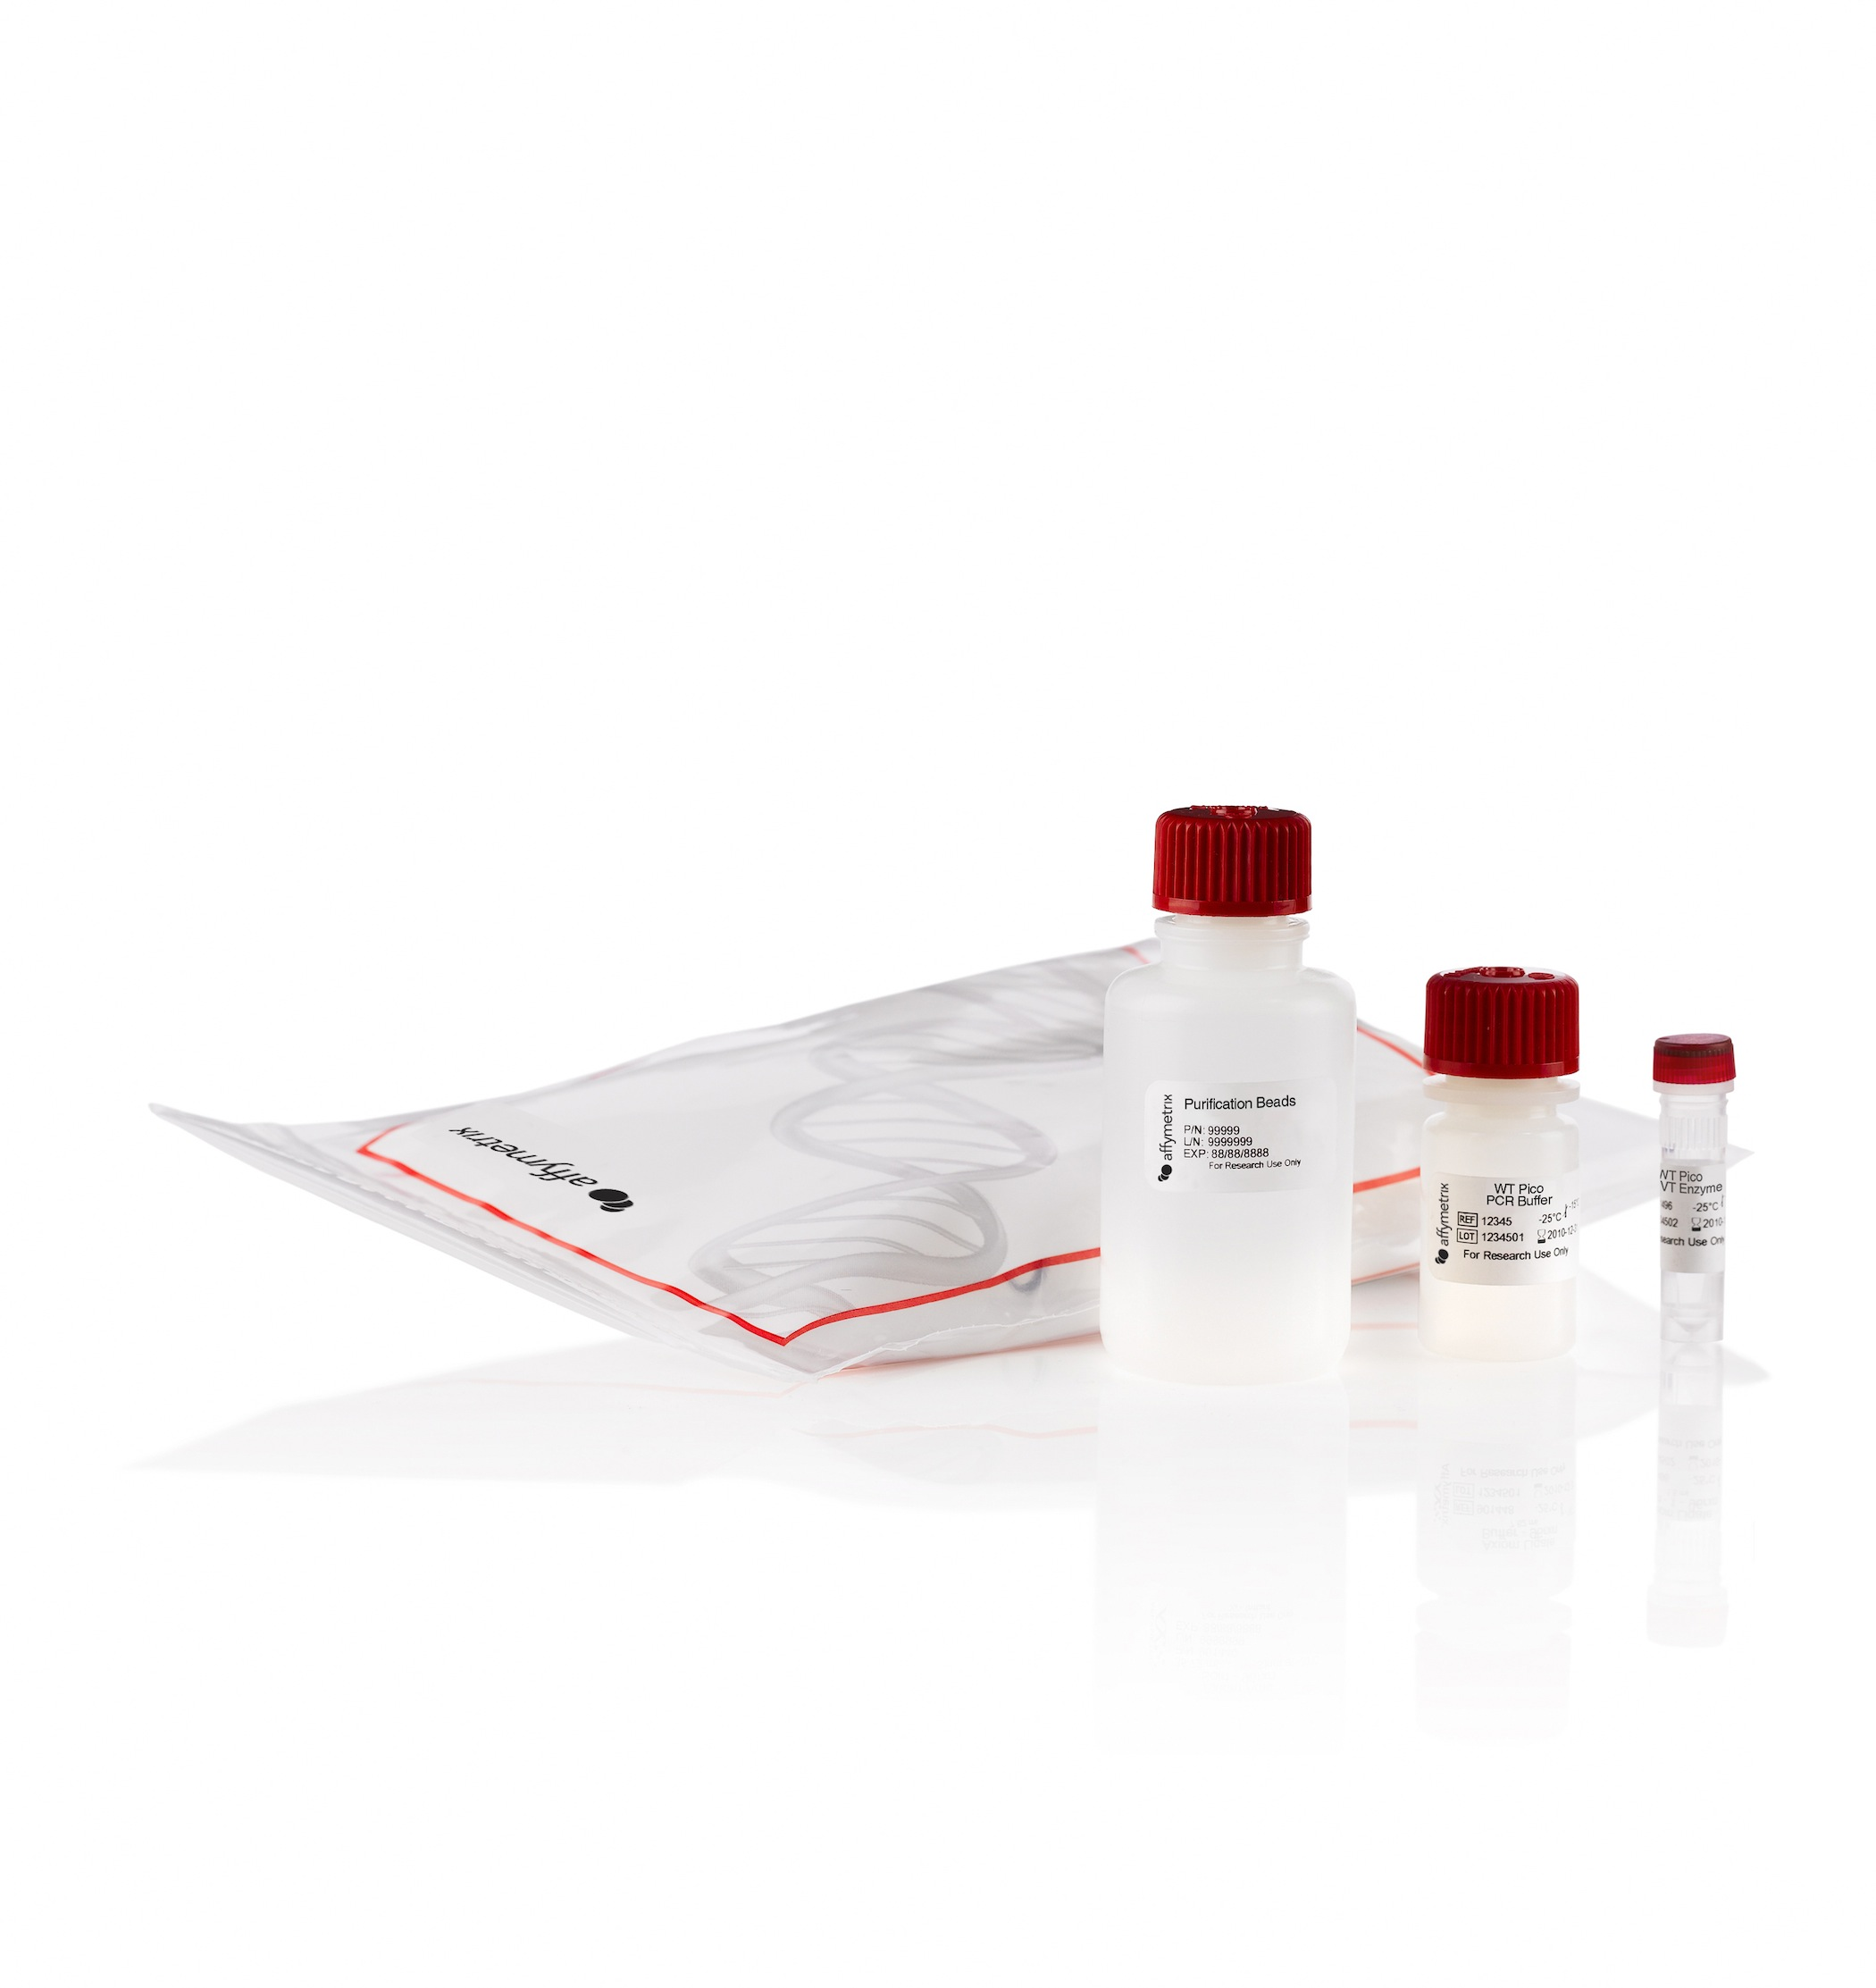 The GeneChip WT Pico Kit for gene expression array target preparation from very small samples